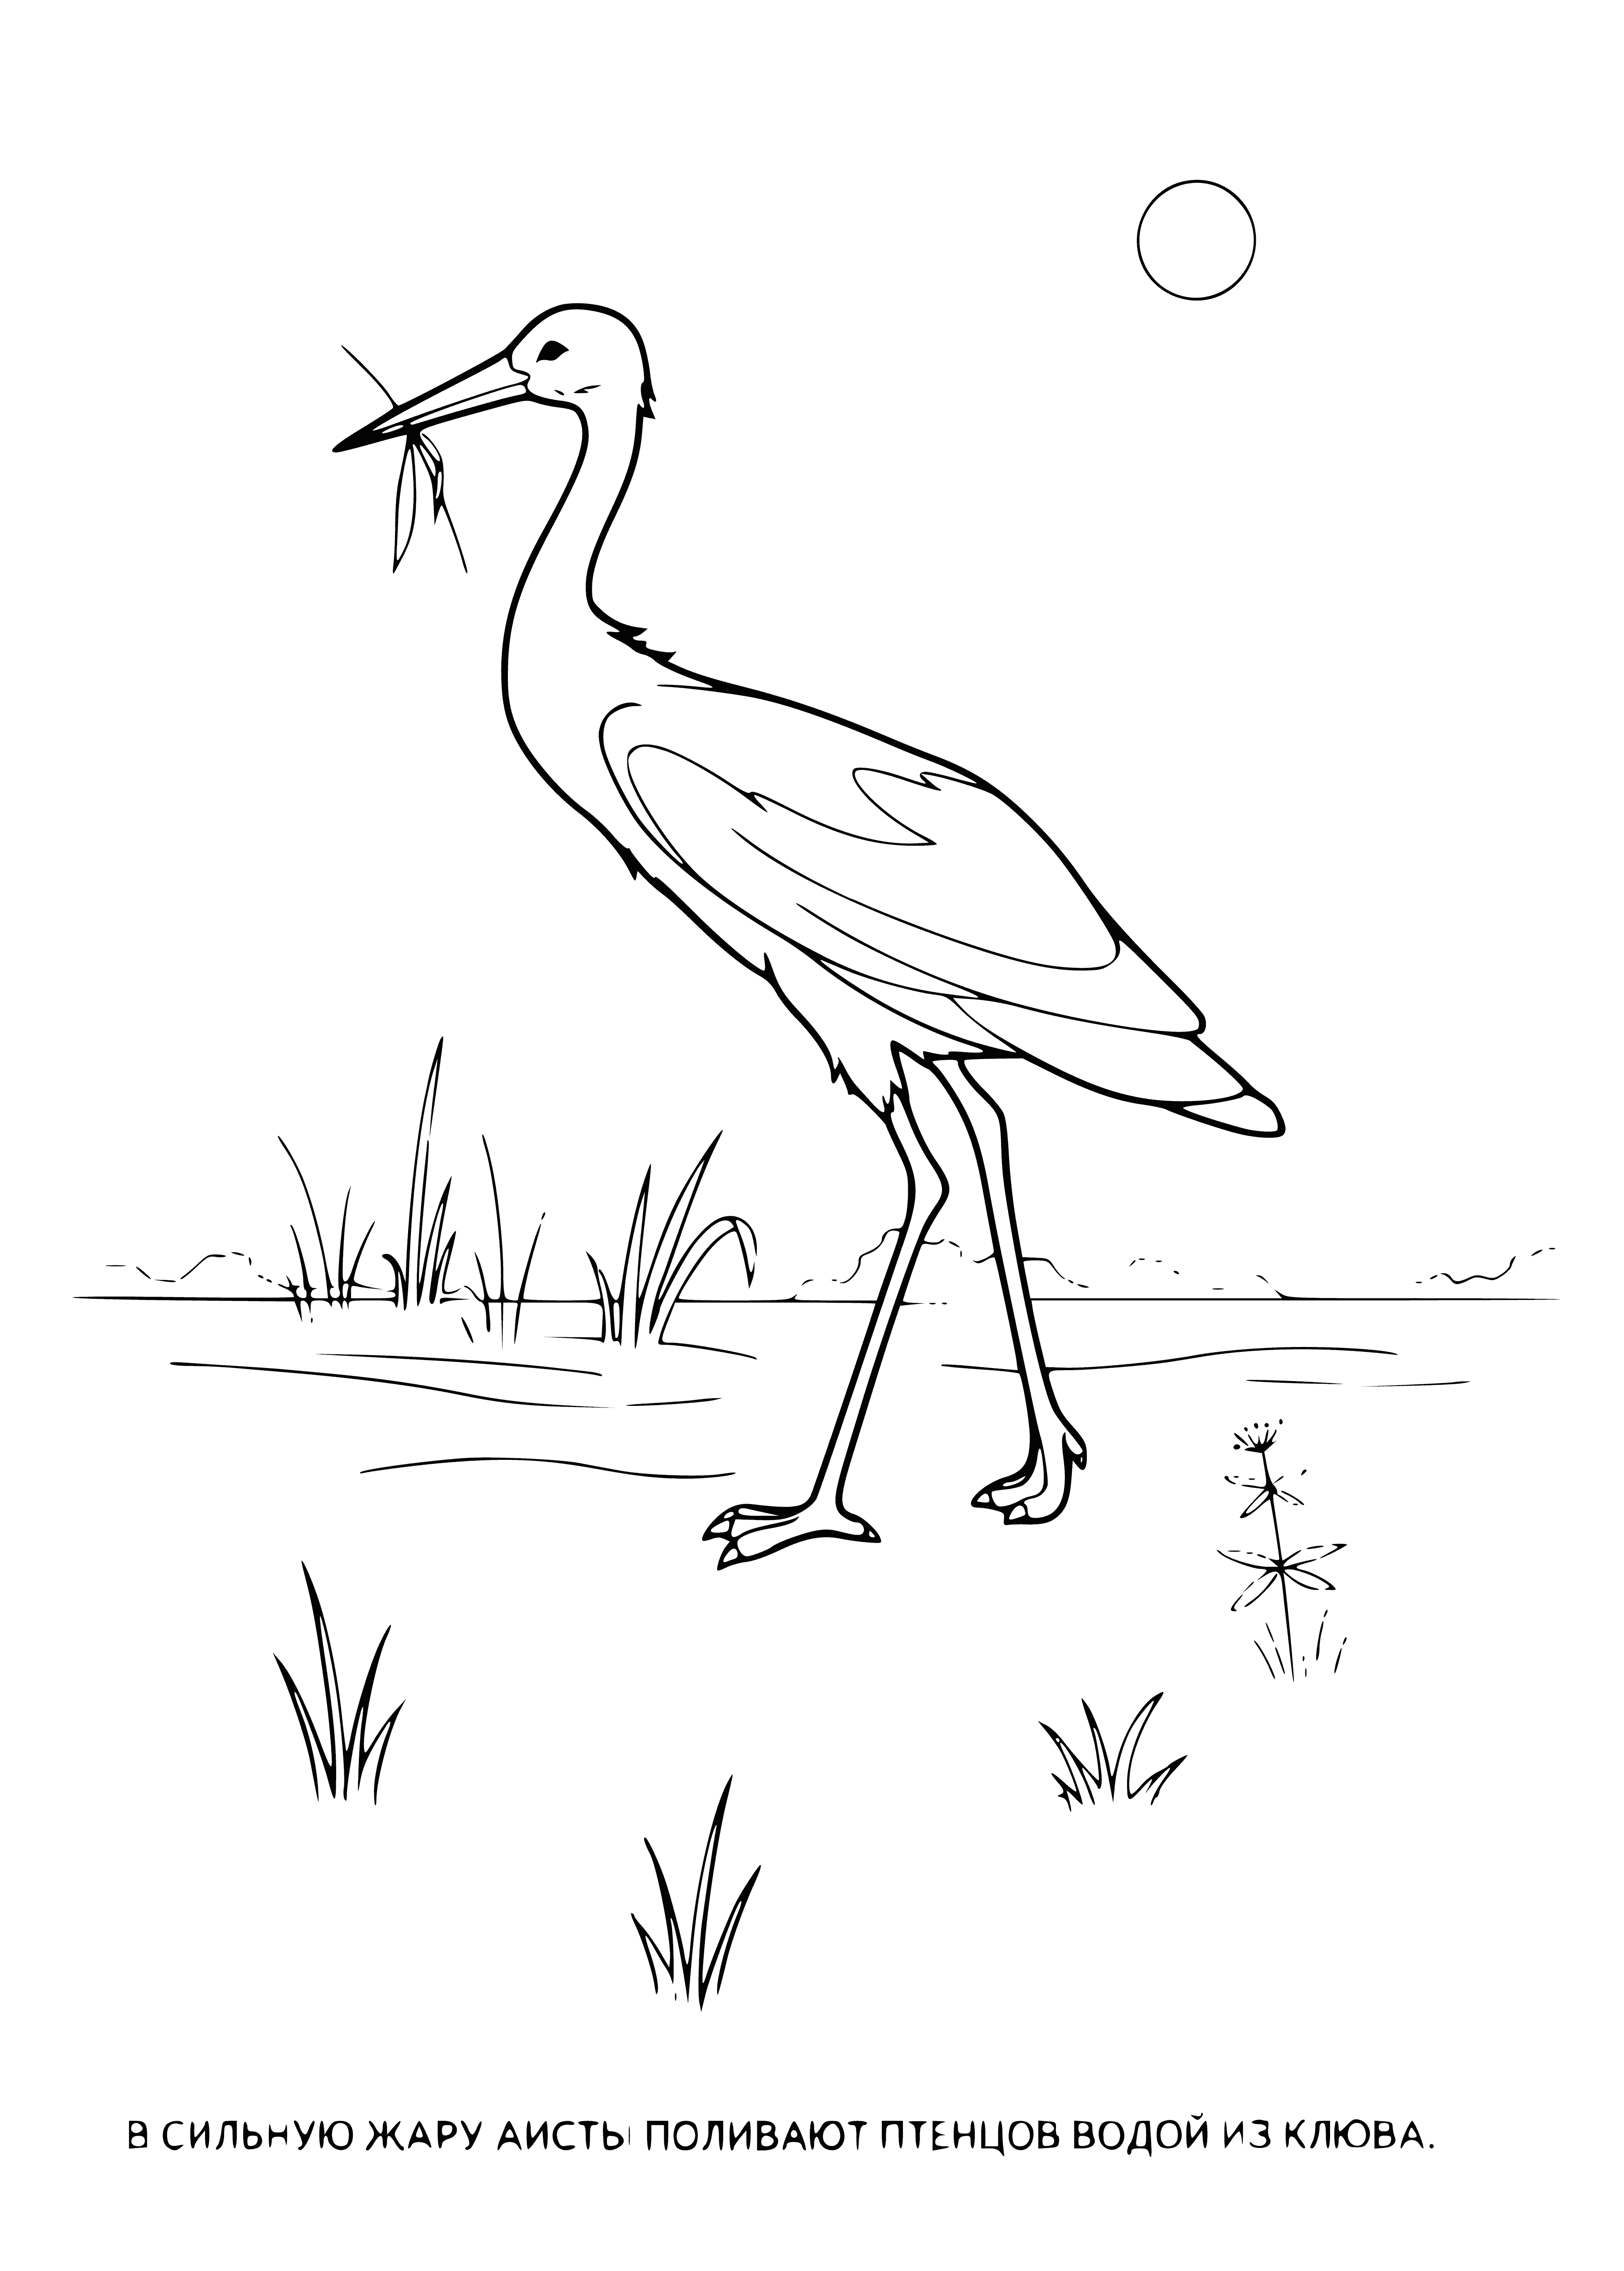 coloring page: Large stork wading through shallow water, neck & bill extended, wings spread wide for takeoff. Searching for food.